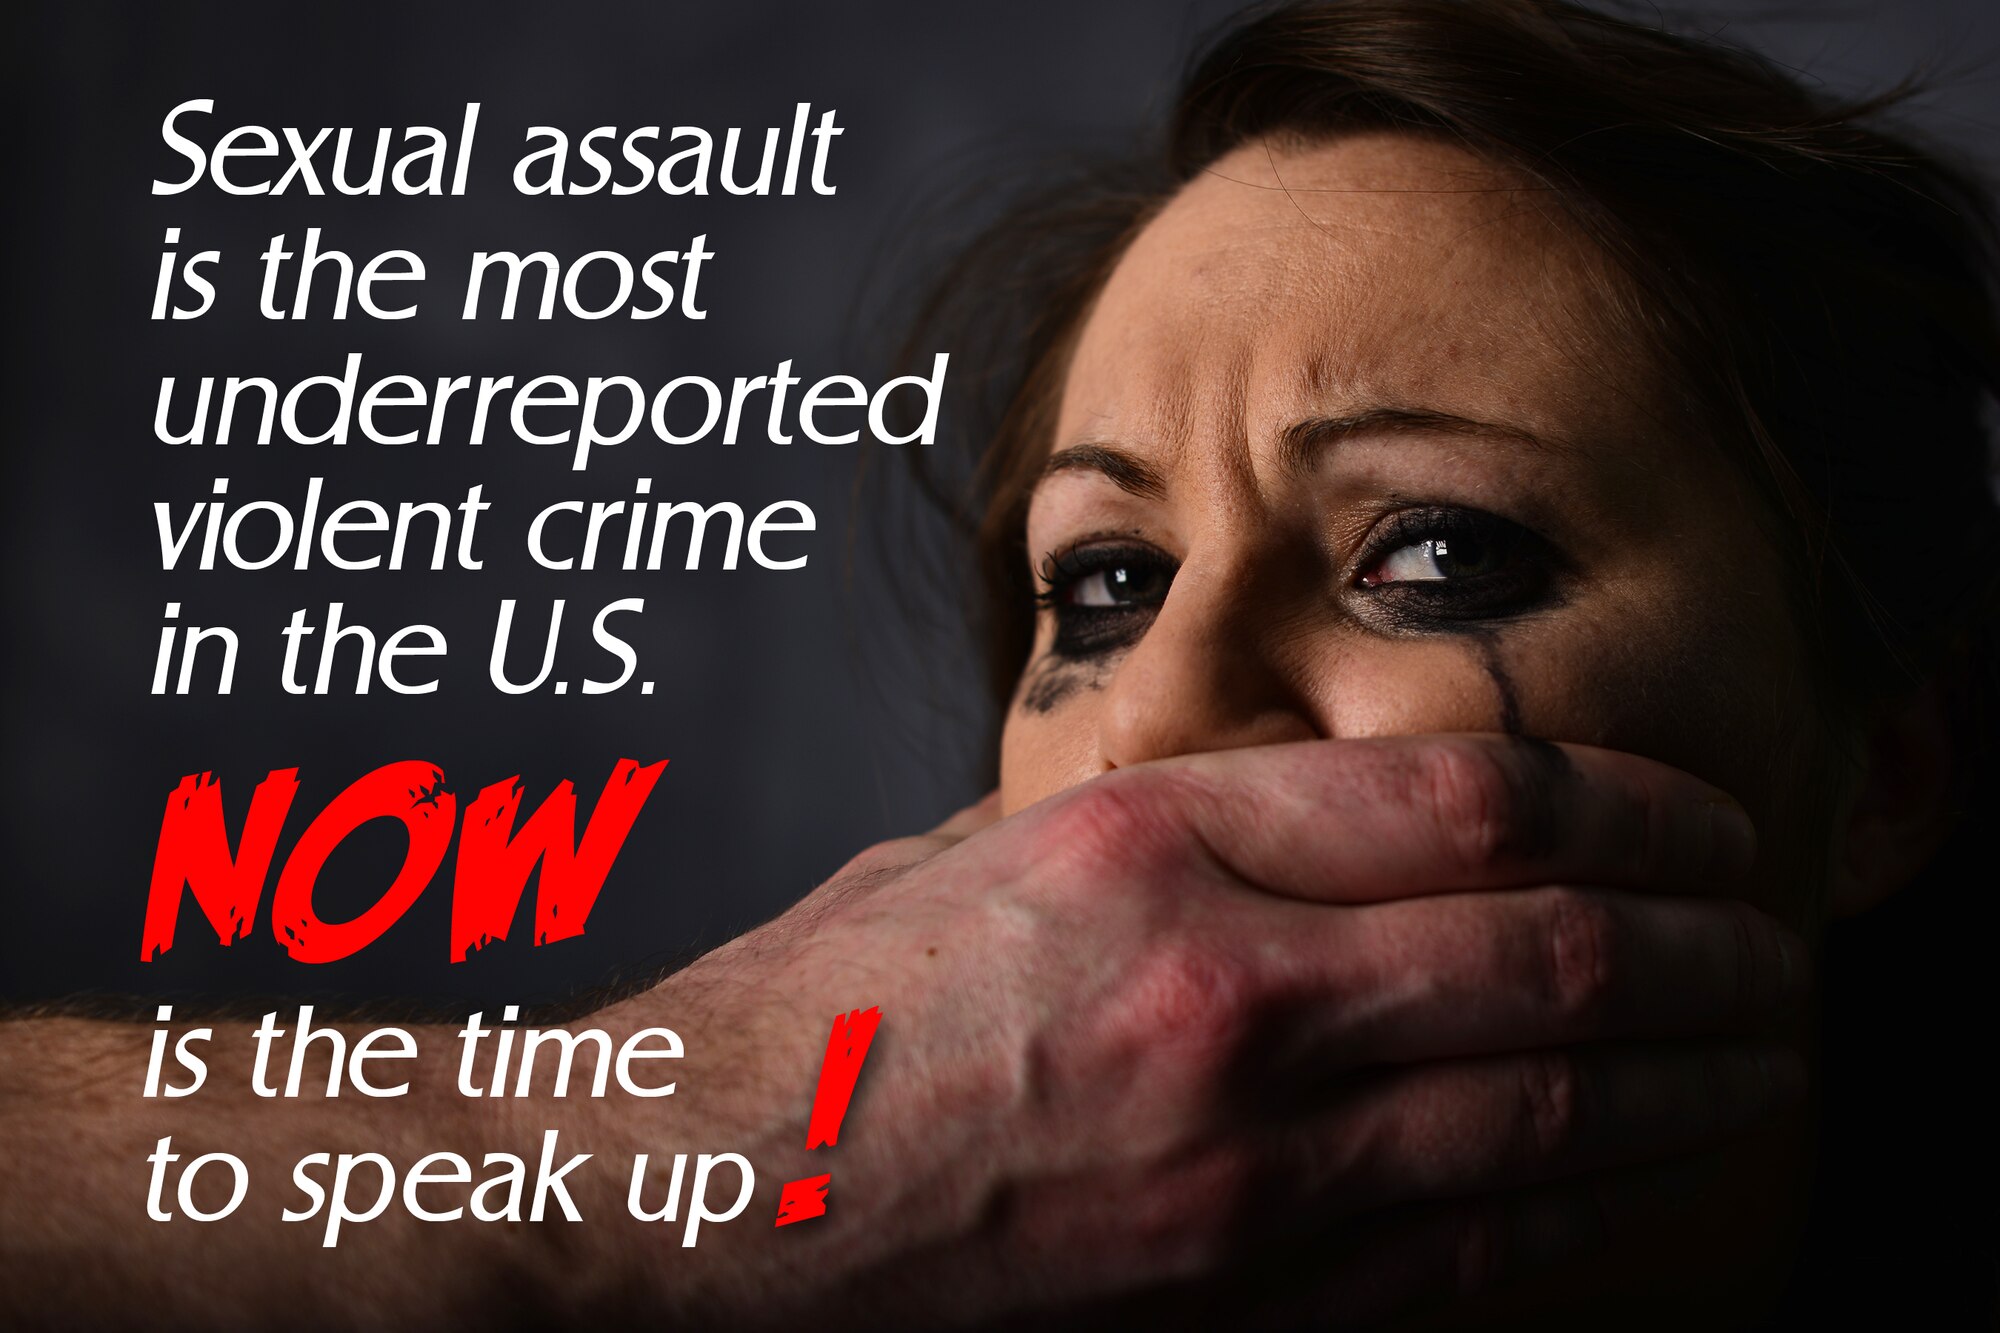 According to the fiscal year 2011 Department of Defense annual report on sexual assault in the military, victim reports per 1,000 Air Force members were at 1.6. The same report states that only 14 percent (about one in six) of the estimated 19,000 victims actually reported their attack. (U.S. Air Force photo illustration/Senior Airman Aaron-Forrest Wainwright)